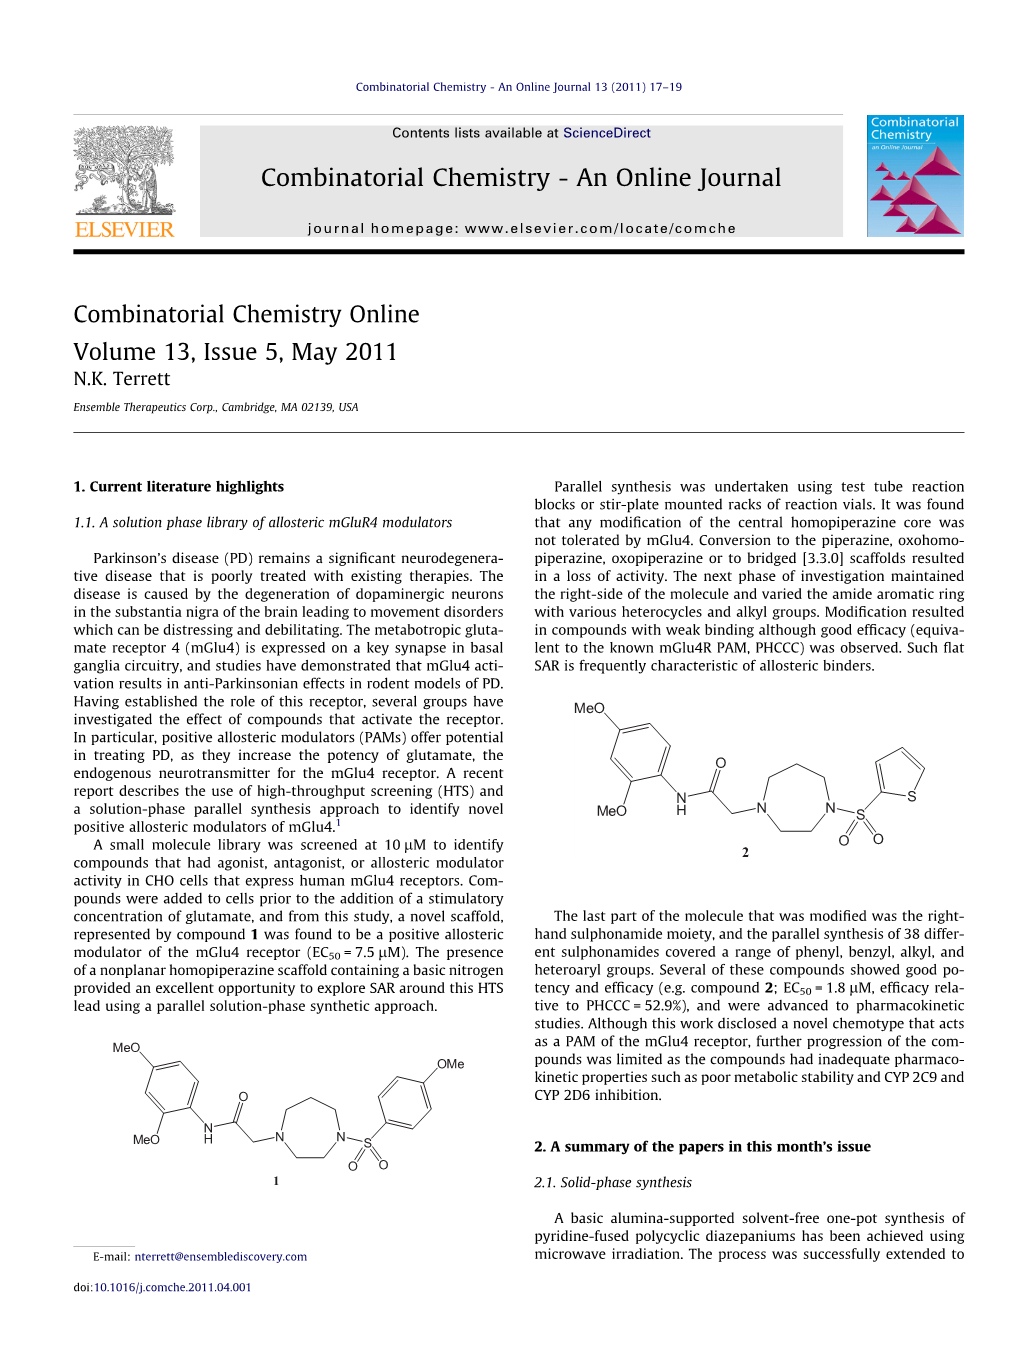 Combinatorial Chemistry Online Volume 13, Issue 5, May 2011 N.K